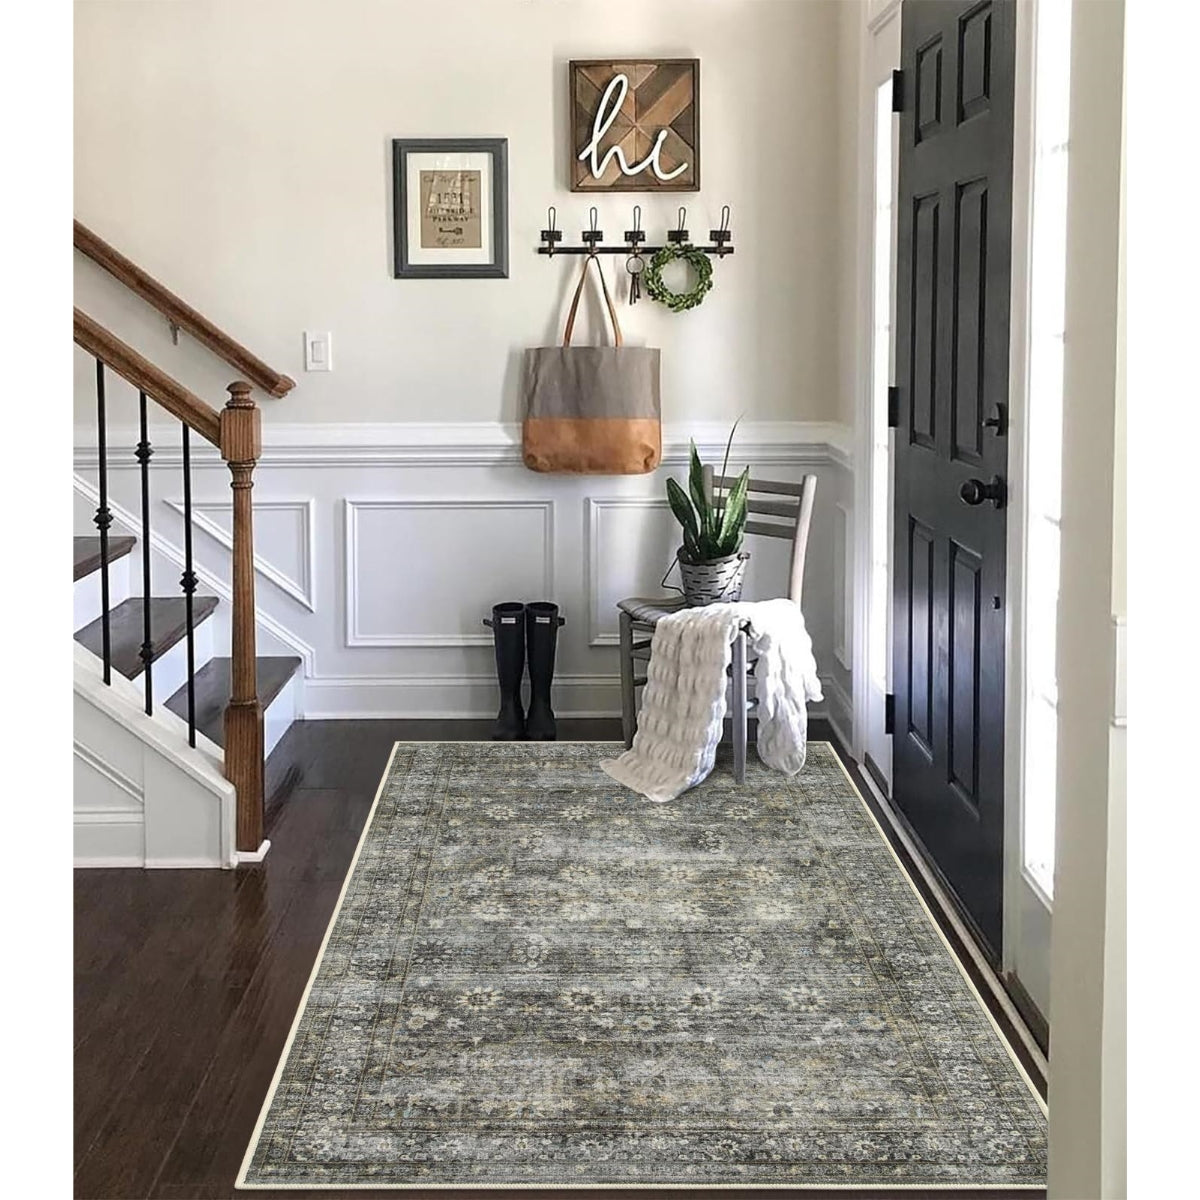 Winifred Distressed Vintage Antique Floral Charcoal Green Area Rug